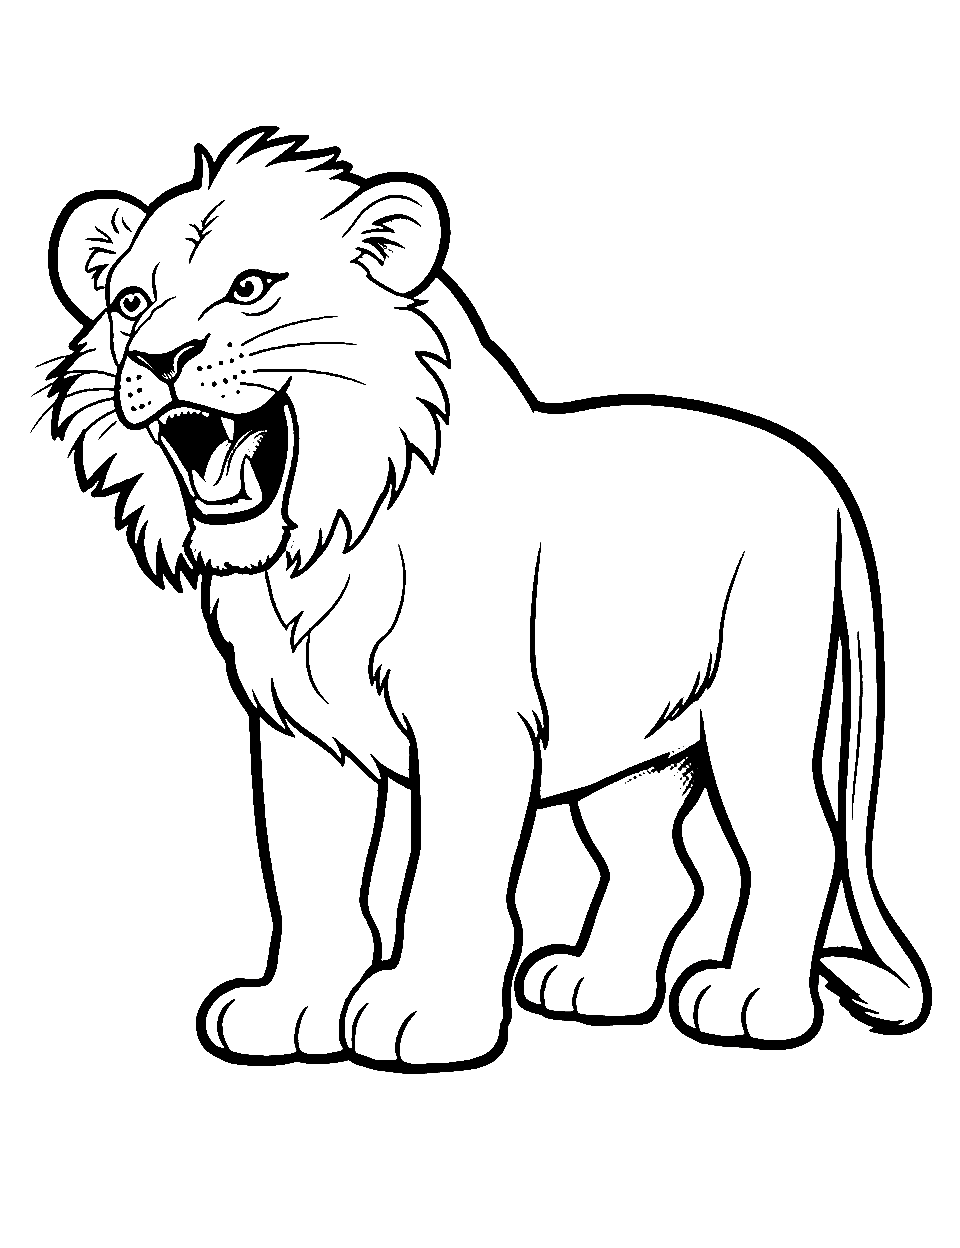 Yawning Cub Coloring Page - A baby lion yawning, showing tiny teeth.